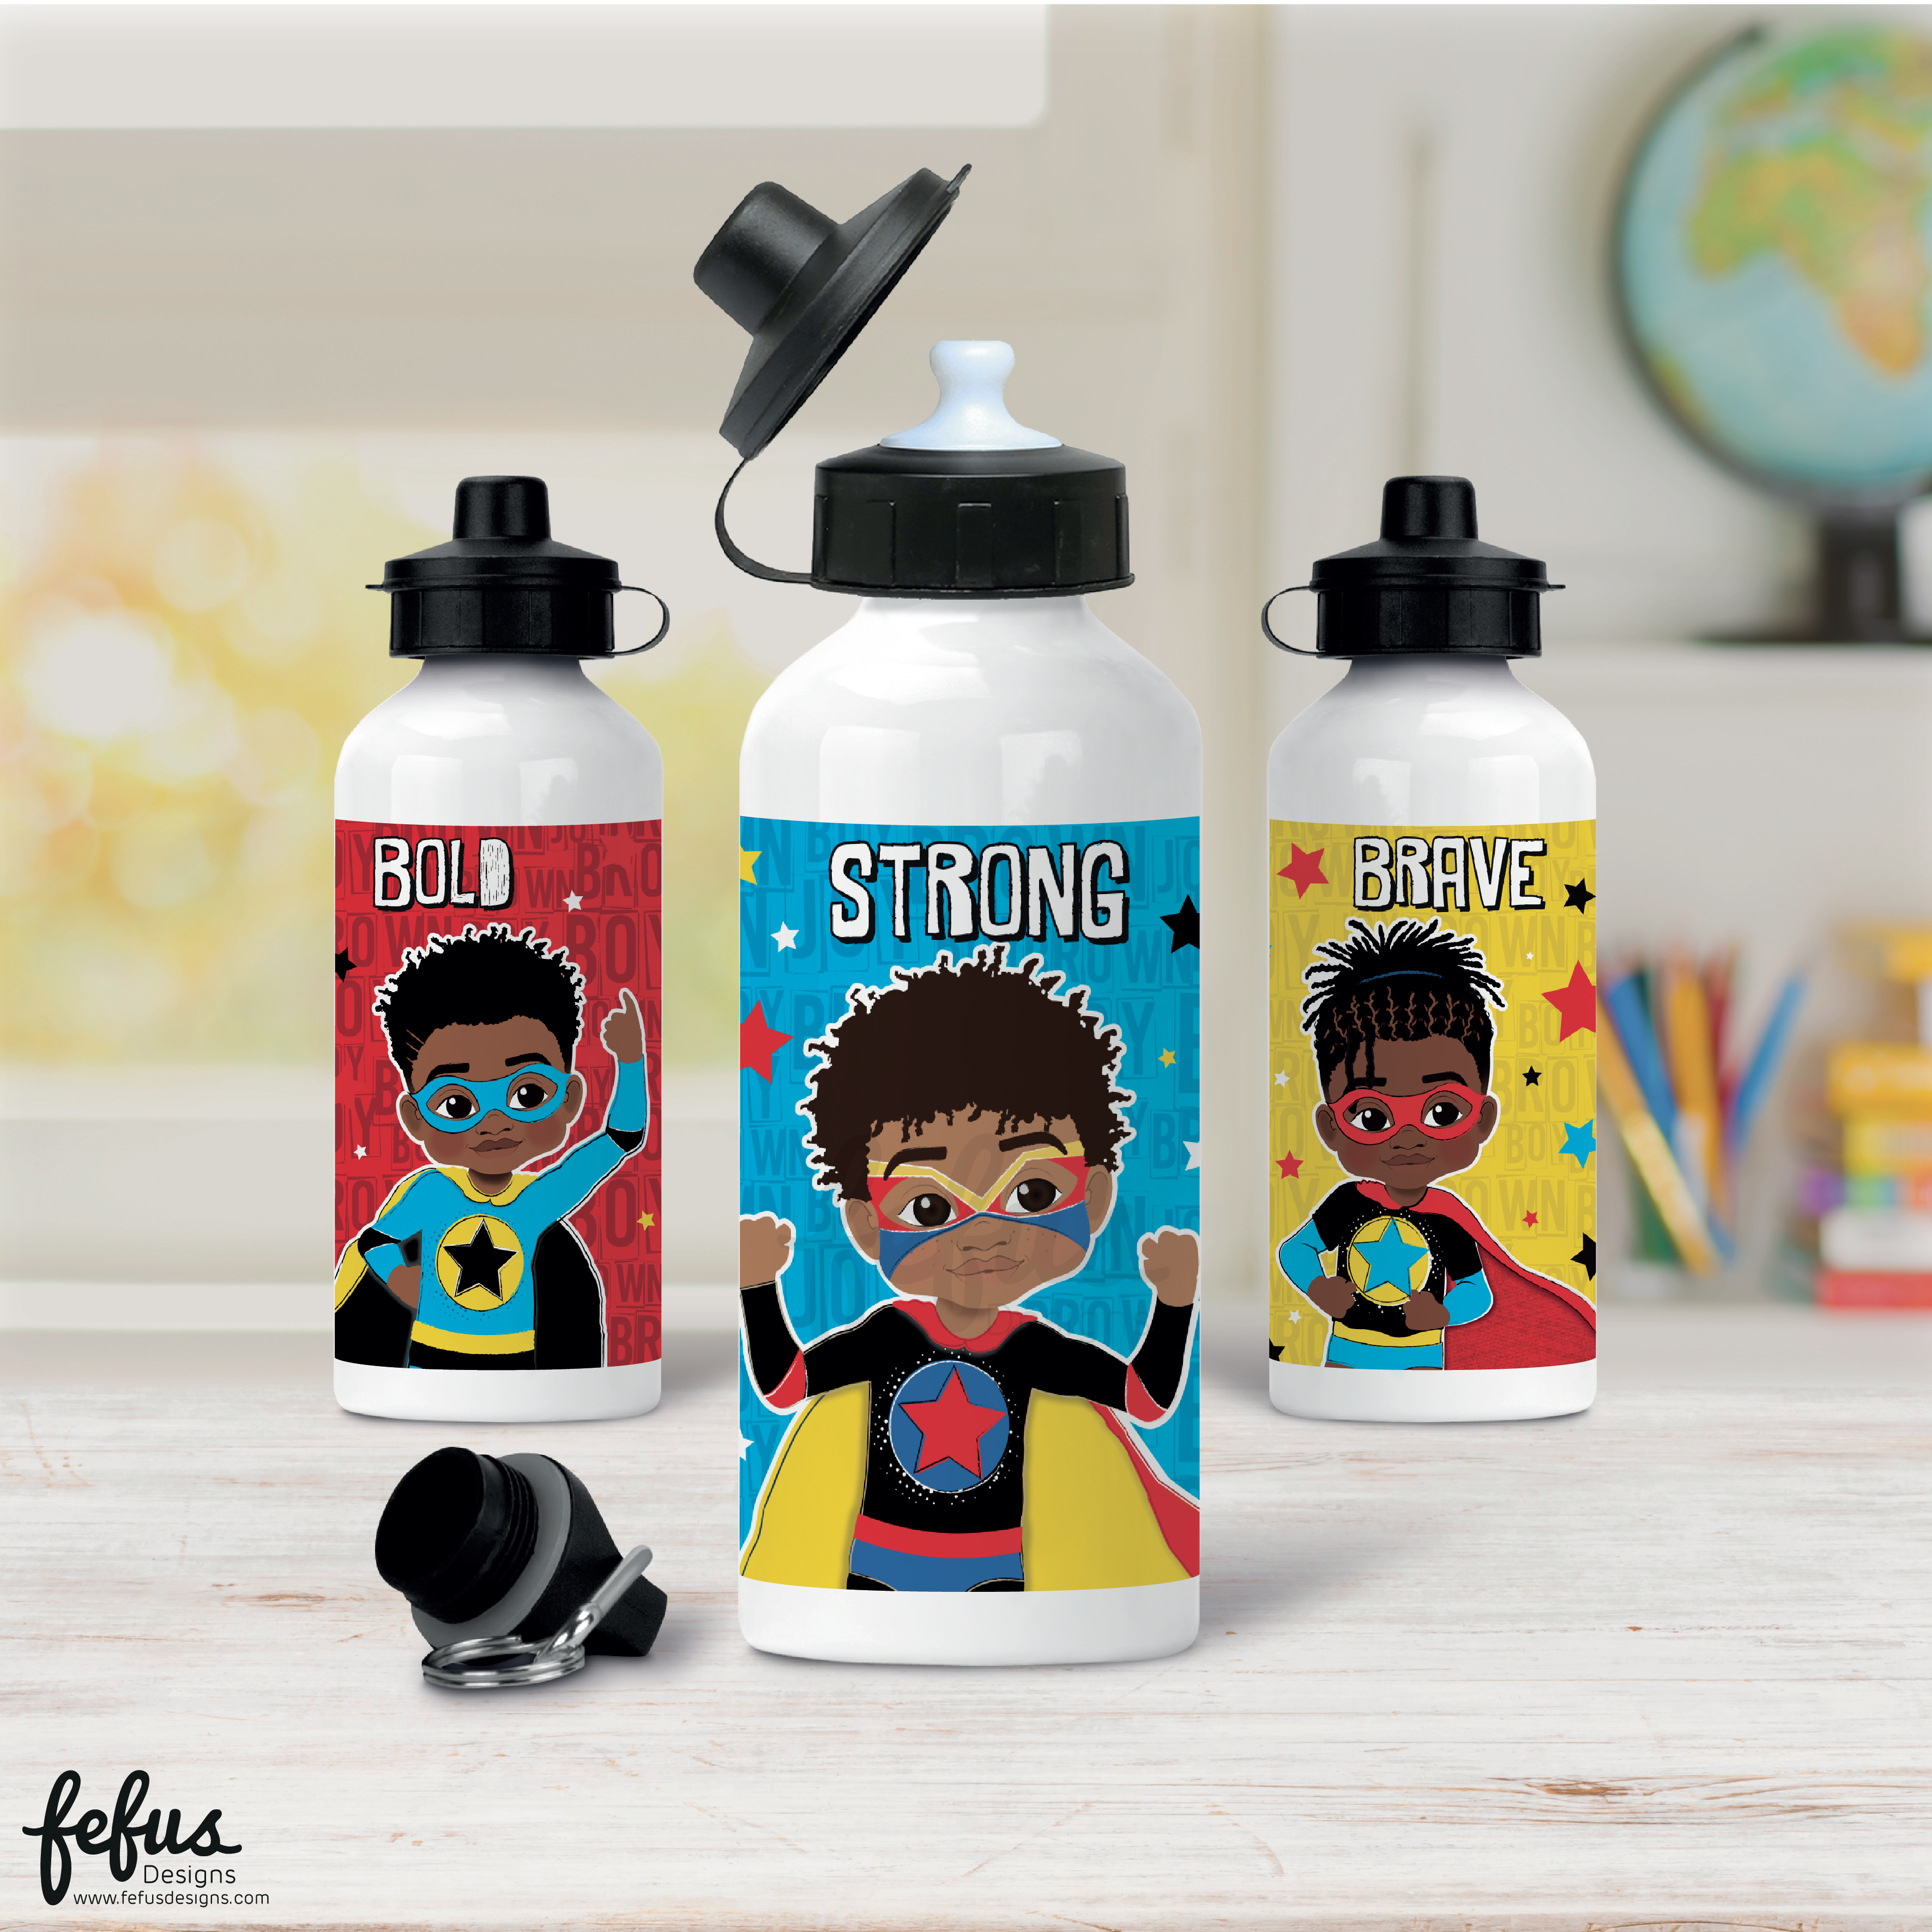 This Melanin Boy Magic Aluminium Water Bottle from Fefus Designs will have your little superhero feeling as strong and captivating as they are! Crafted from durable and lightweight aluminium, this water bottle is perfect for school, sports, and outdoor adventures. Plus, the awesome design featuring three brown superheroes and "Melanin Magic" will have them radiating confidence and embracing their melanin beauty! Superpowers not included, but fun and unique style is!